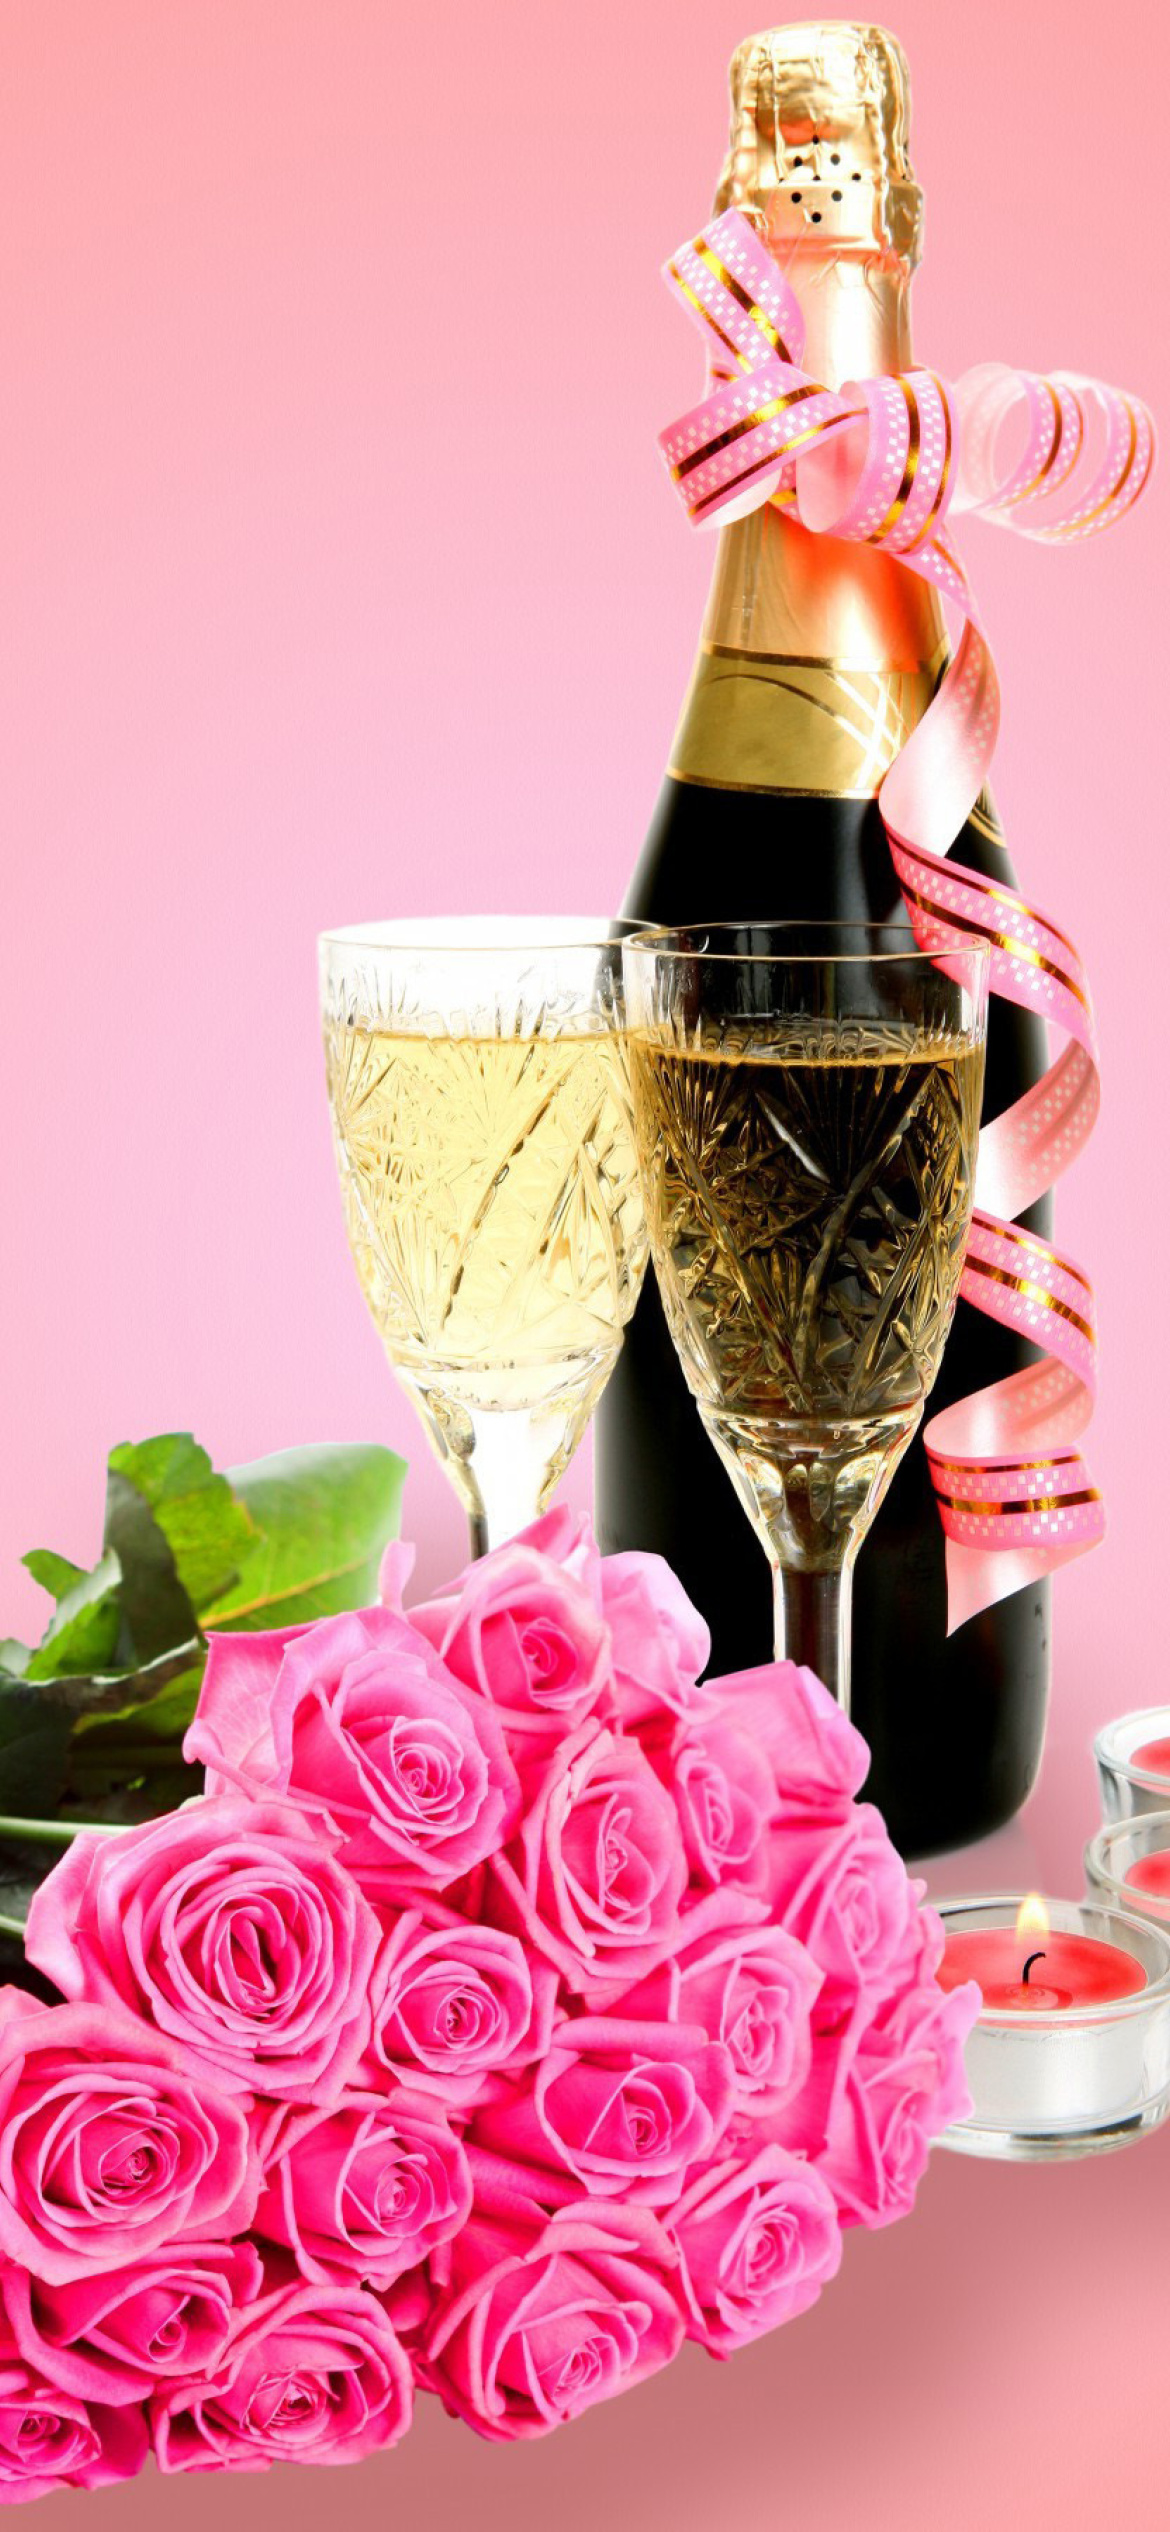 Clipart Roses Bouquet and Champagne wallpaper 1170x2532